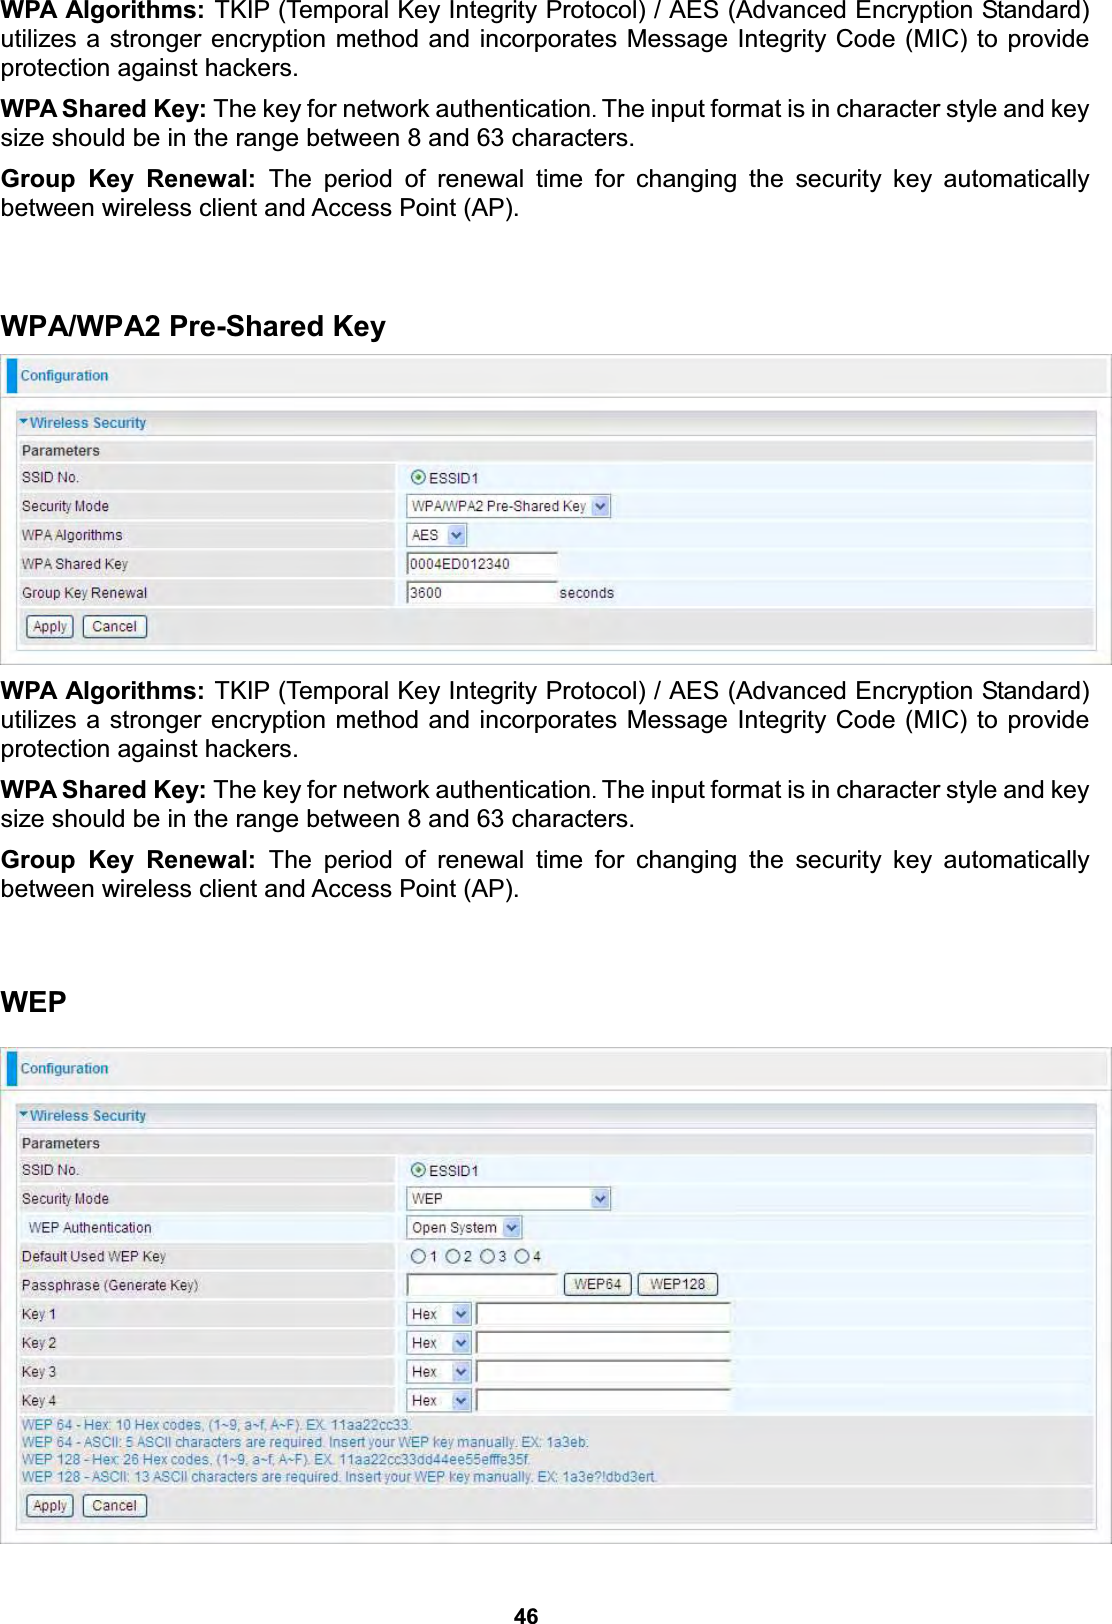  46 WPA Algorithms: TKIP (Temporal Key Integrity Protocol) / AES (Advanced Encryption Standard) utilizes a stronger encryption method and incorporates Message Integrity Code (MIC) to provide protection against hackers. WPA Shared Key: The key for network authentication. The input format is in character style and key size should be in the range between 8 and 63 characters. Group Key Renewal: The period of renewal time for changing the security key automatically between wireless client and Access Point (AP).   WPA/WPA2 Pre-Shared Key  WPA Algorithms: TKIP (Temporal Key Integrity Protocol) / AES (Advanced Encryption Standard) utilizes a stronger encryption method and incorporates Message Integrity Code (MIC) to provide protection against hackers. WPA Shared Key: The key for network authentication. The input format is in character style and key size should be in the range between 8 and 63 characters. Group Key Renewal: The period of renewal time for changing the security key automatically between wireless client and Access Point (AP).   WEP    